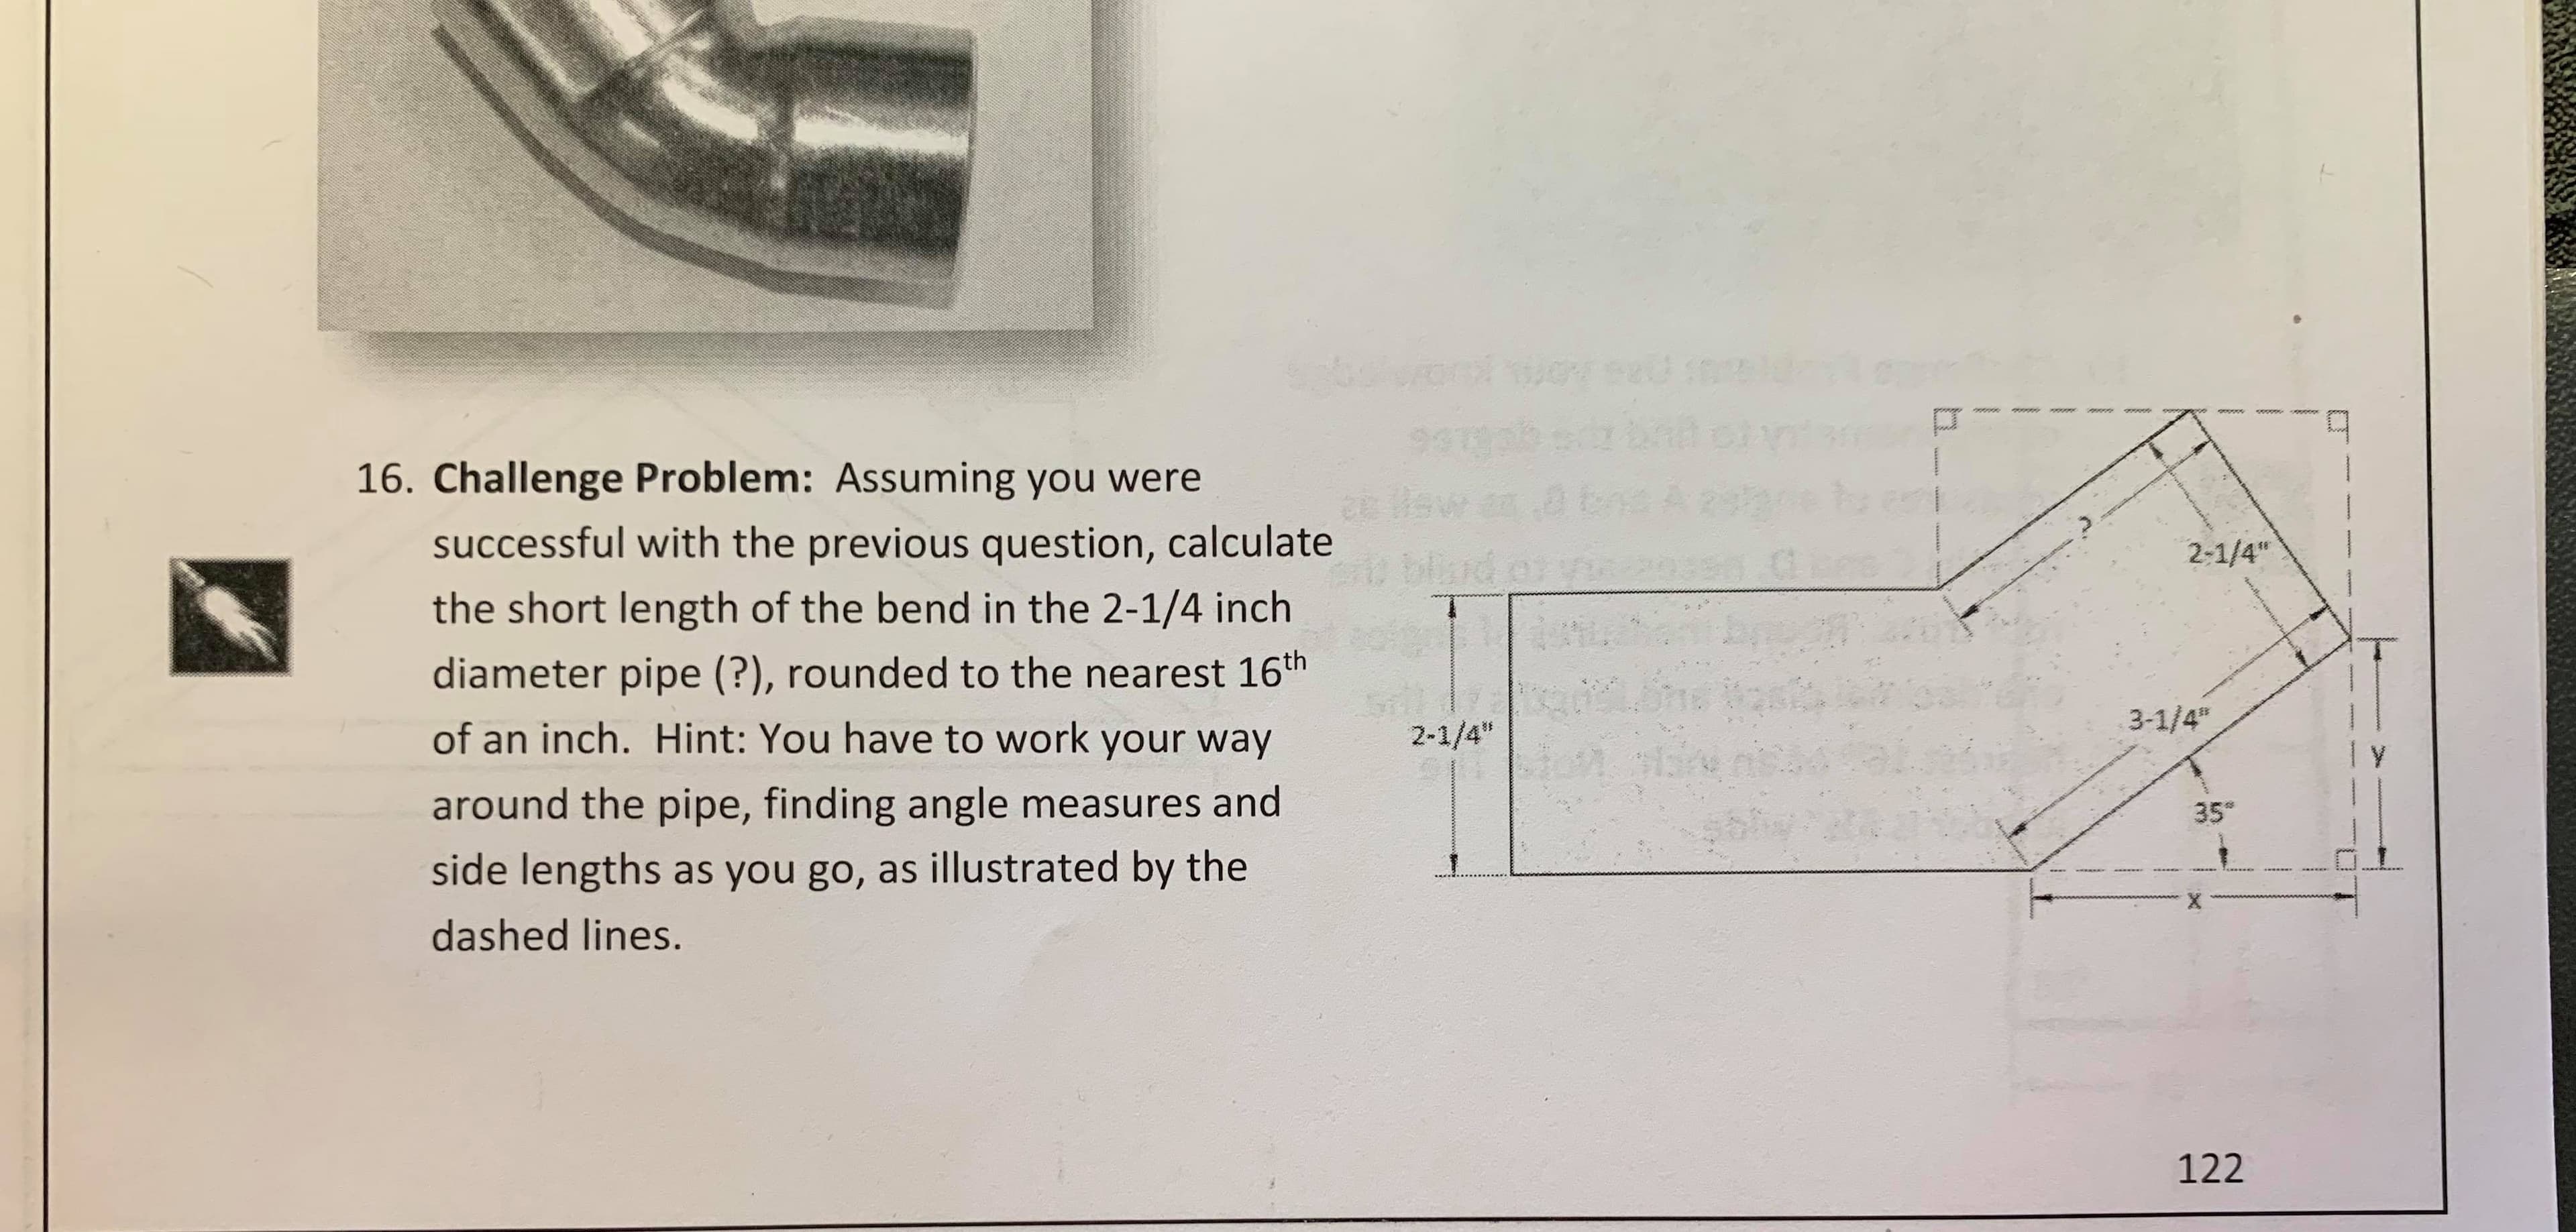 eveatt
నిలికంలక
931
a Pau
t blad
16. Challenge Problem: Assuming you were
successful with the previous question, calculate
2-1/4"
the short length of the bend in the 2-1/4 inch
diameter pipe (?), rounded to the nearest 16th
of an inch. Hint: You have to work your way
3-1/4"
2-1/4"
around the pipe, finding angle measures and
35
side lengths as you go, as illustrated by the
dashed lines.
122
